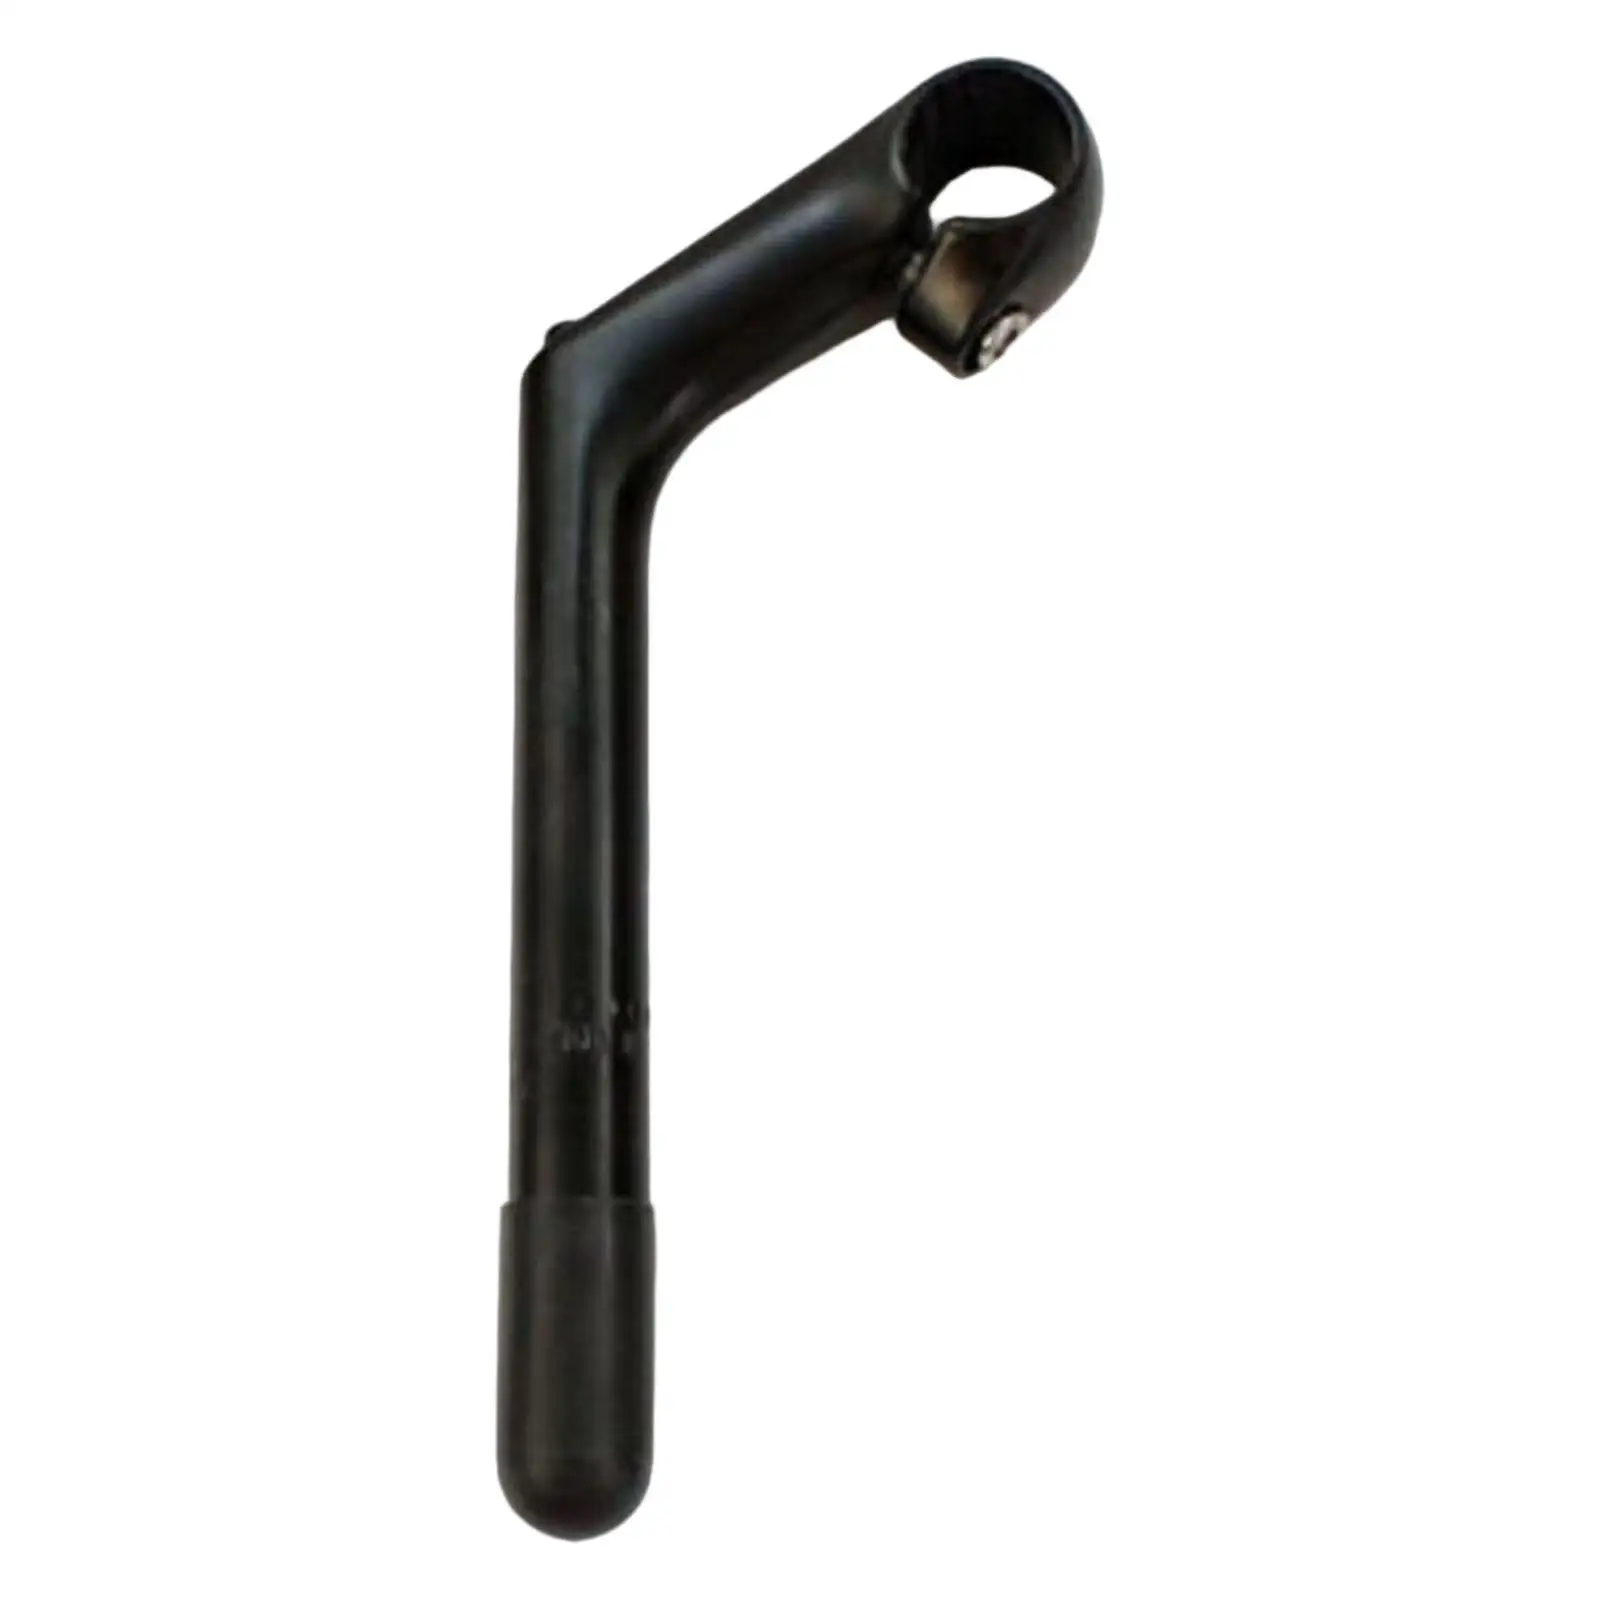  Quill Stem 25.4mmx80mm with Alloy Metal Handlebar Clamp Black